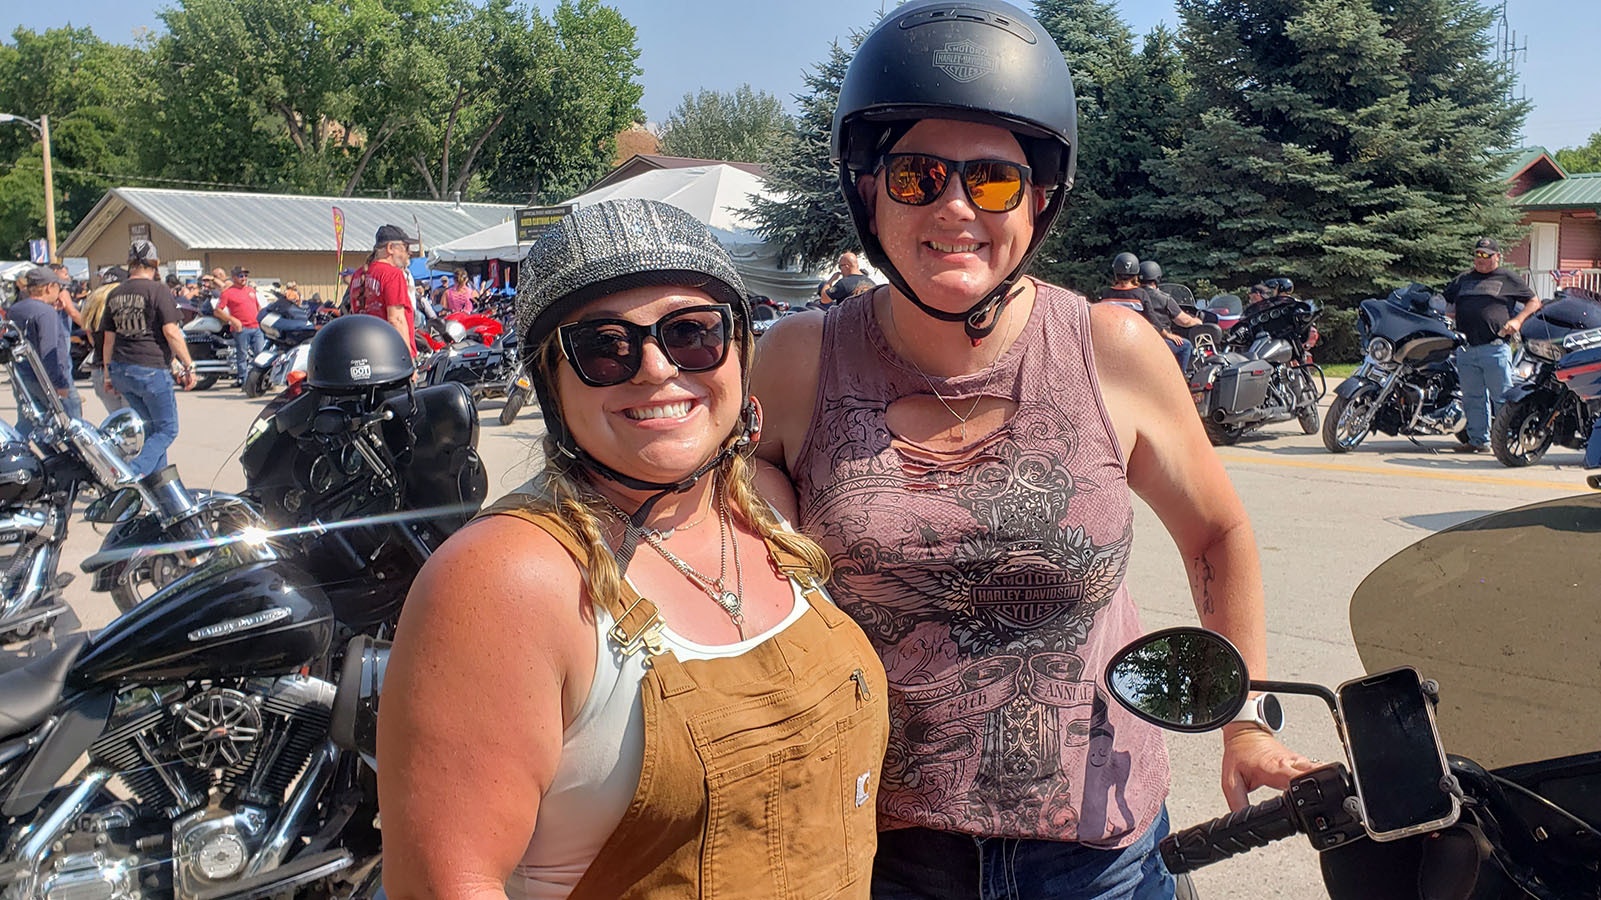 Kady Dubrock, left, with the sparkly helmet poses with Erika Green Labor for a photo. Dubrock is part of a younger generation that's been finding out about the Sturgis Motorcycle Rally.